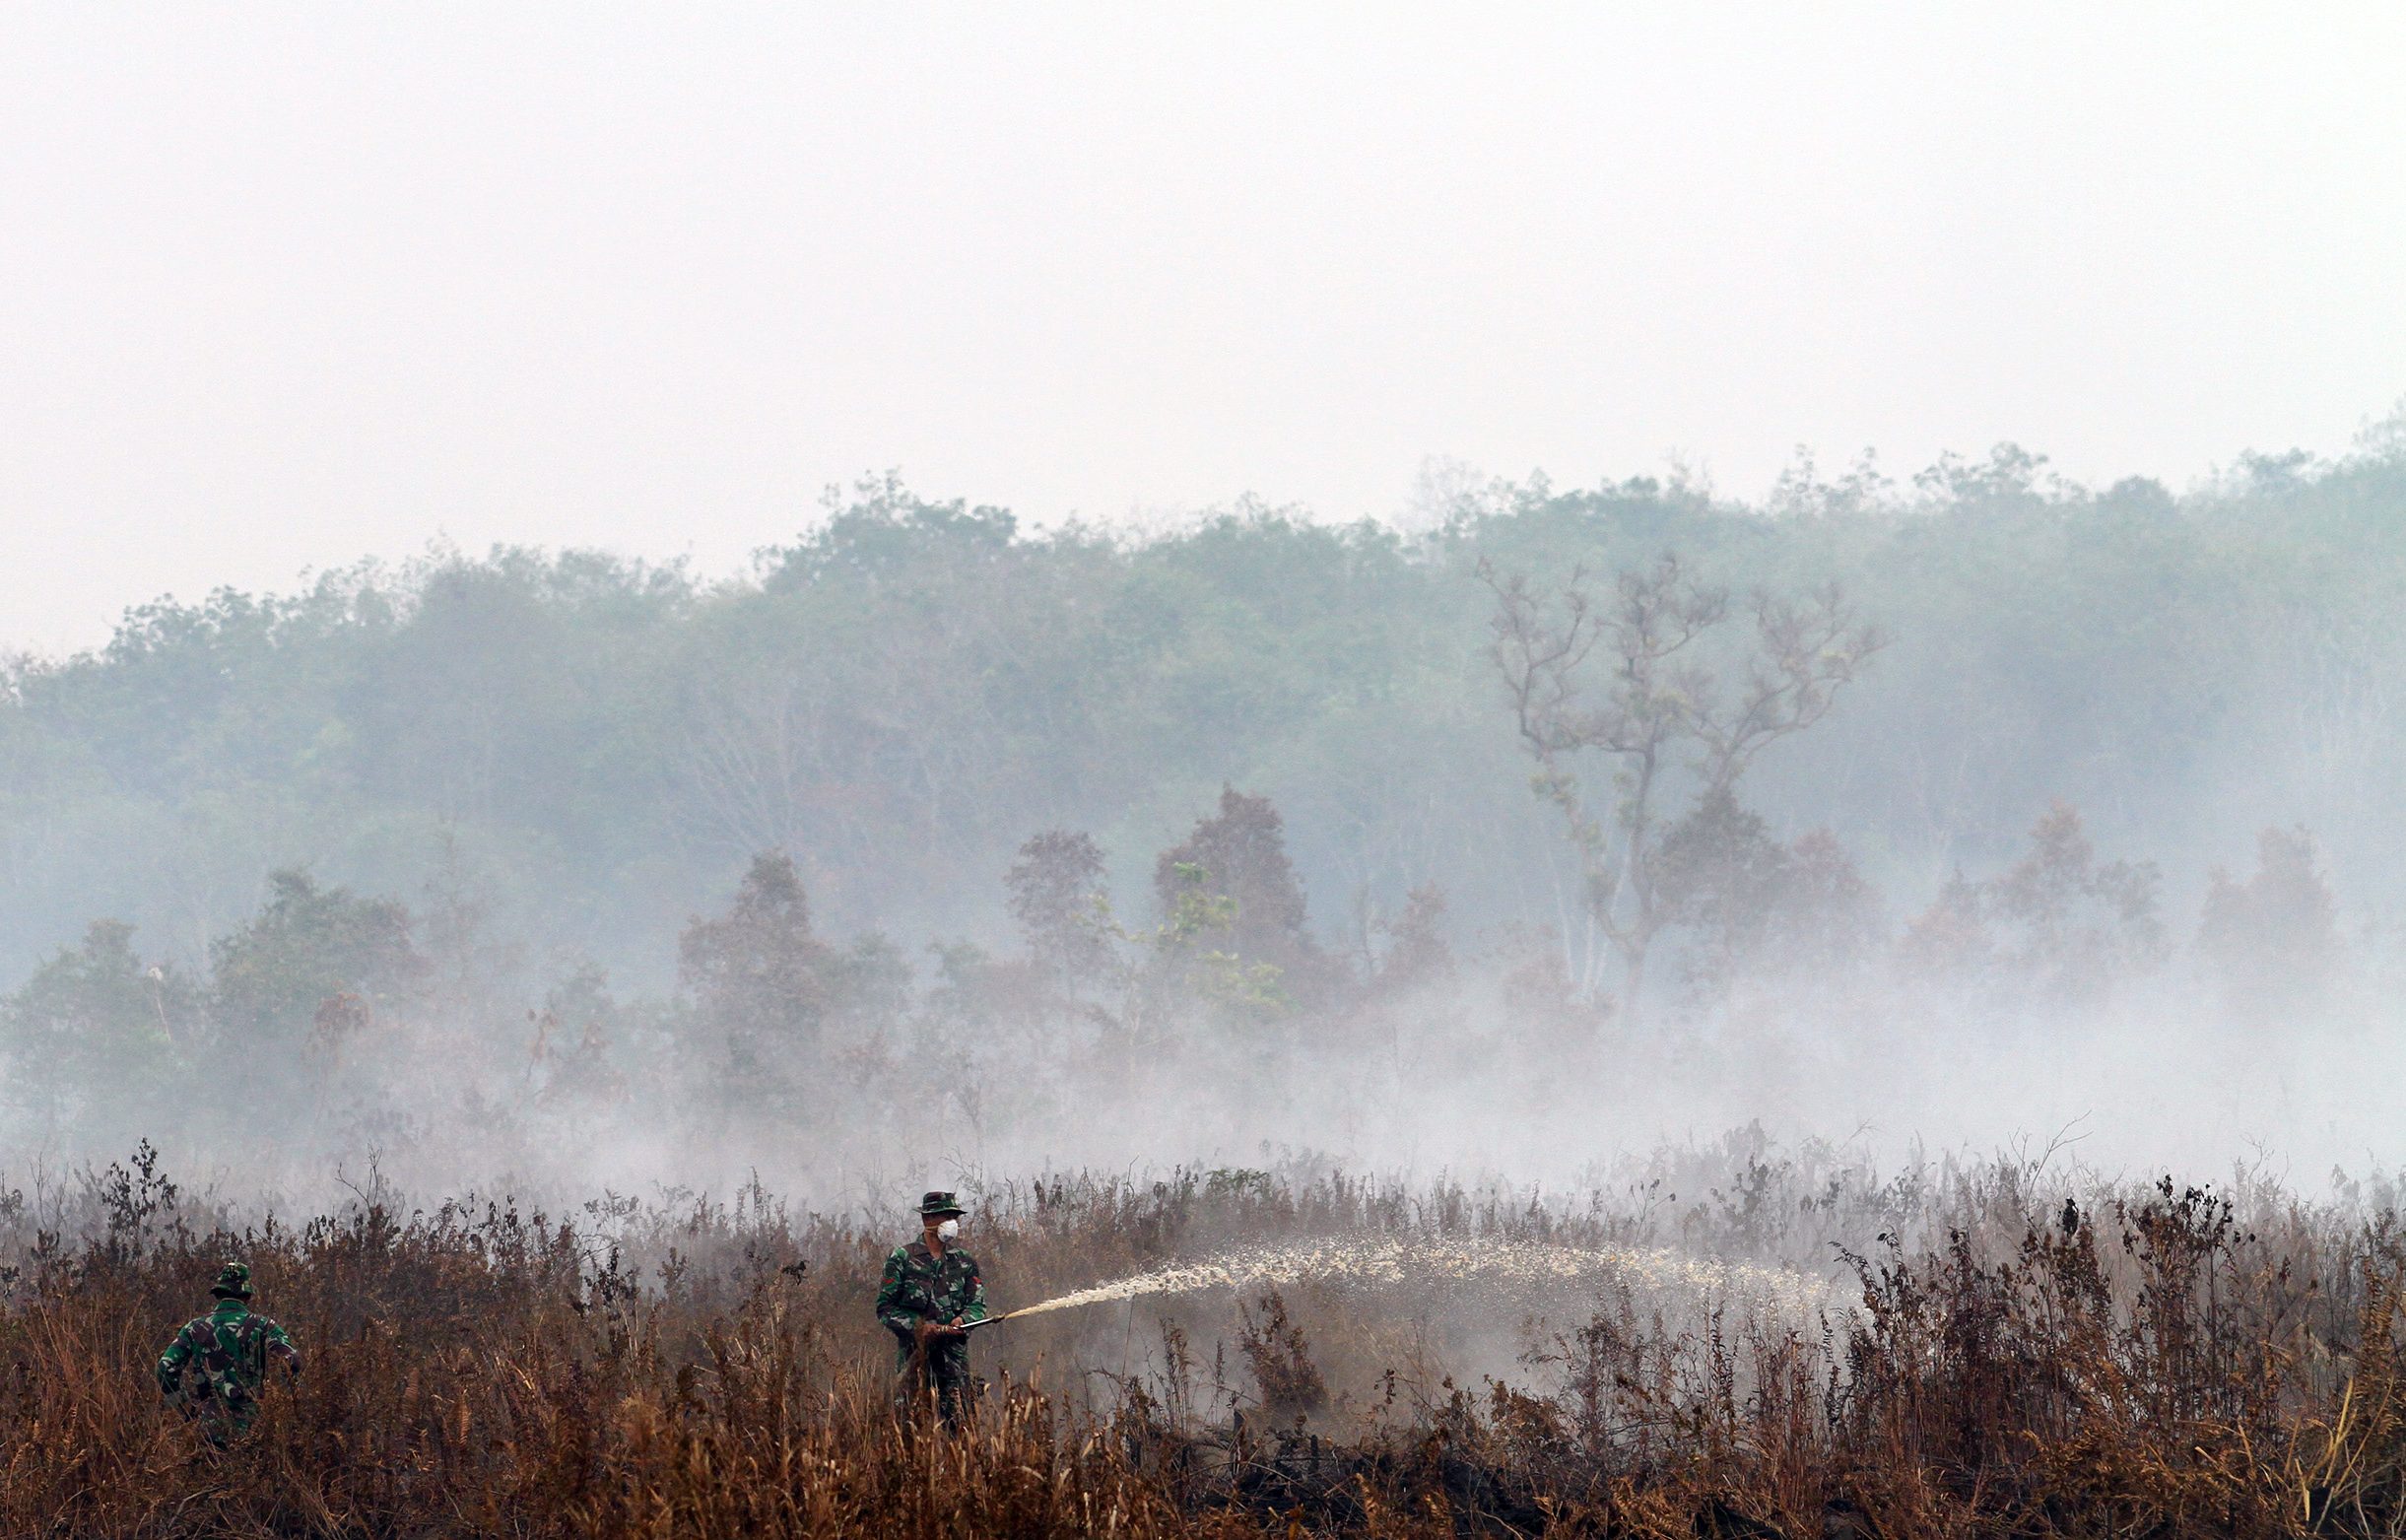 Indonesia insists it’s doing all it can to combat haze